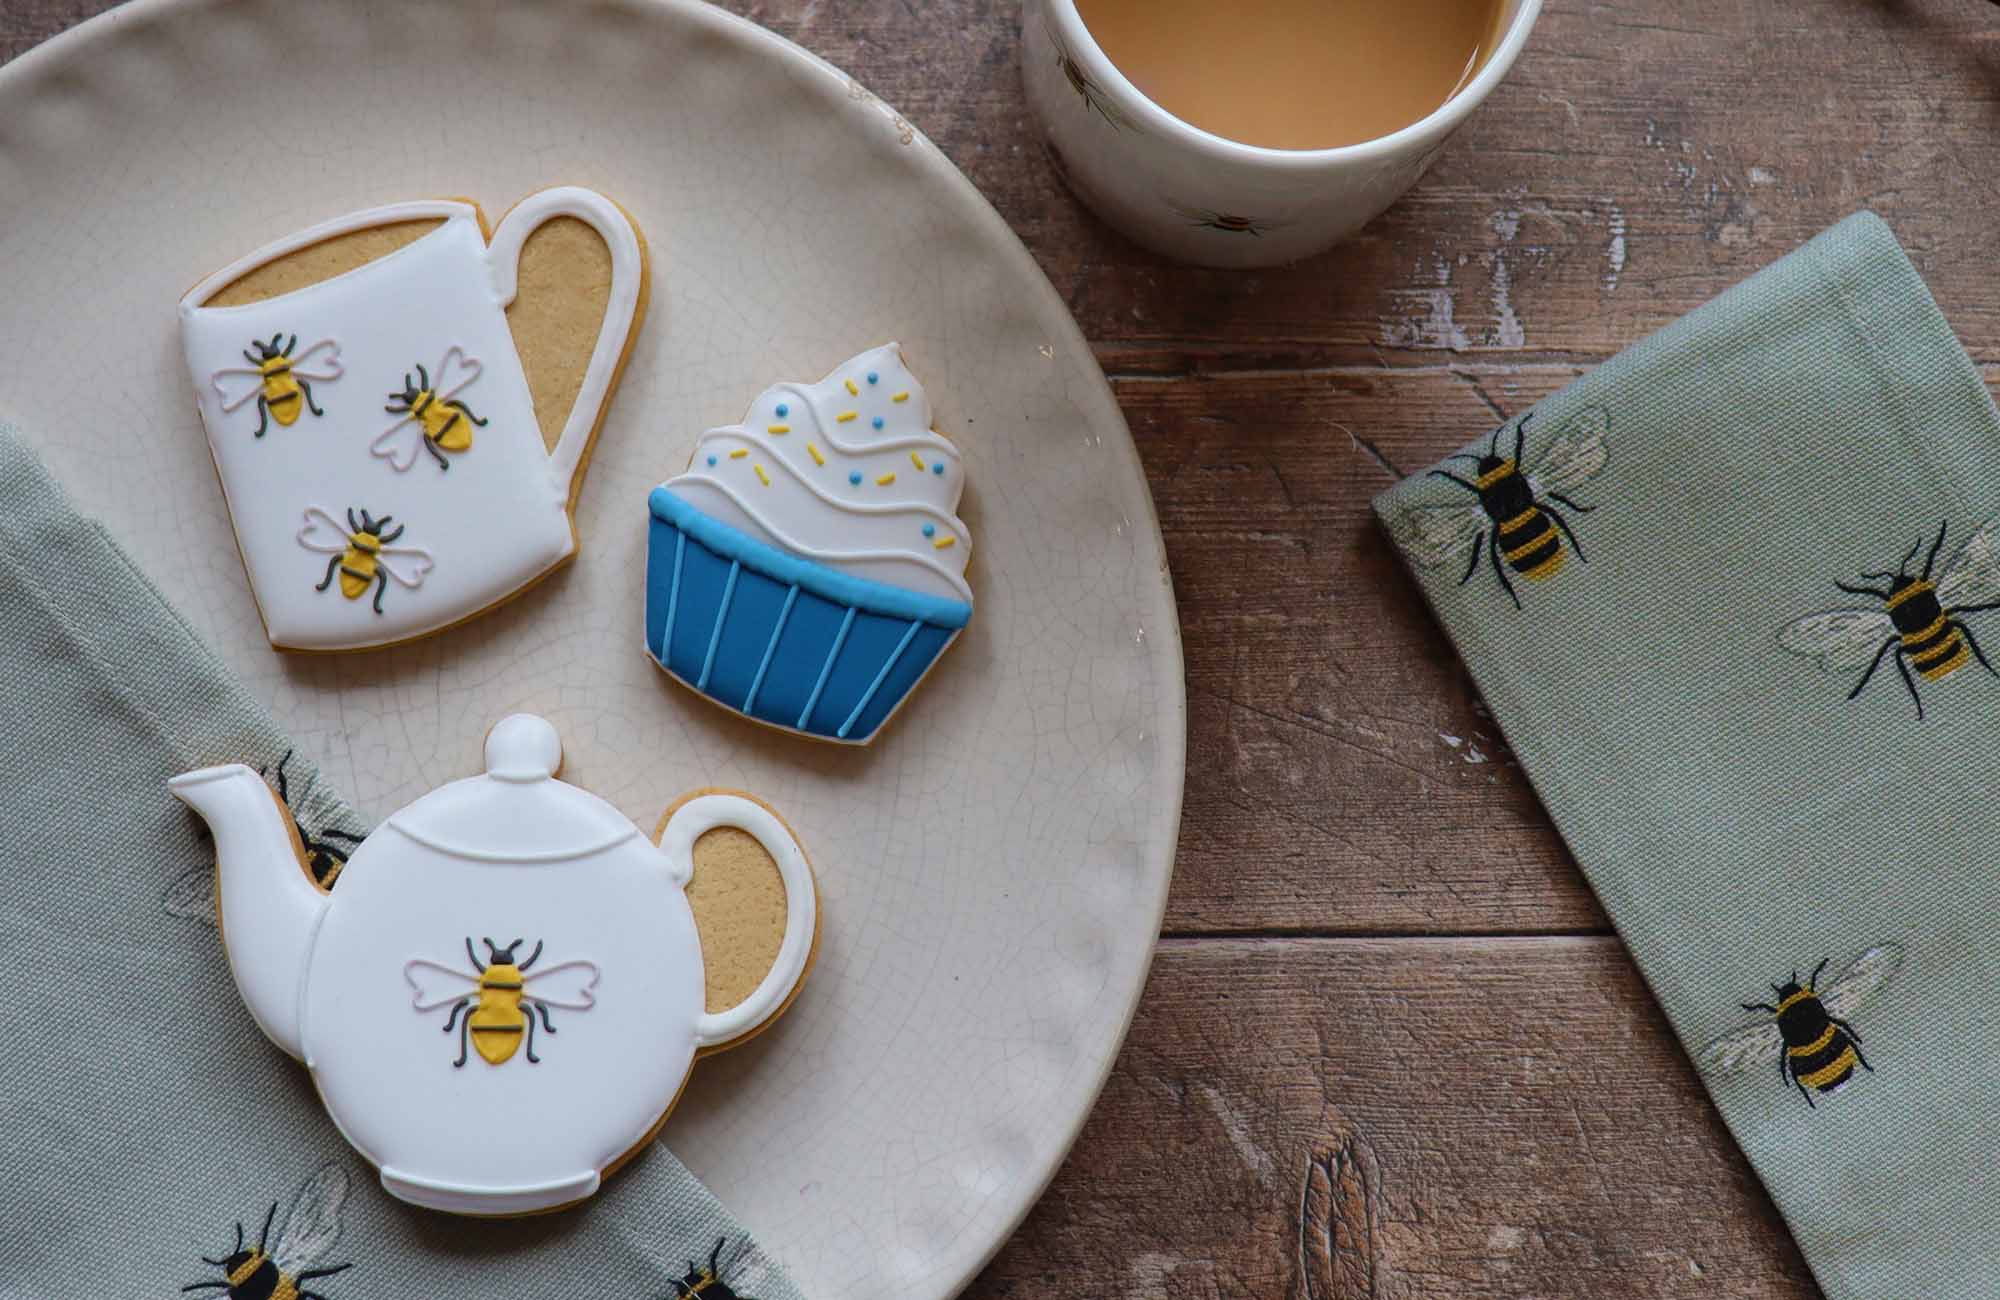 At the table with Biscuiteers founder and CEO, Harriet Hastings